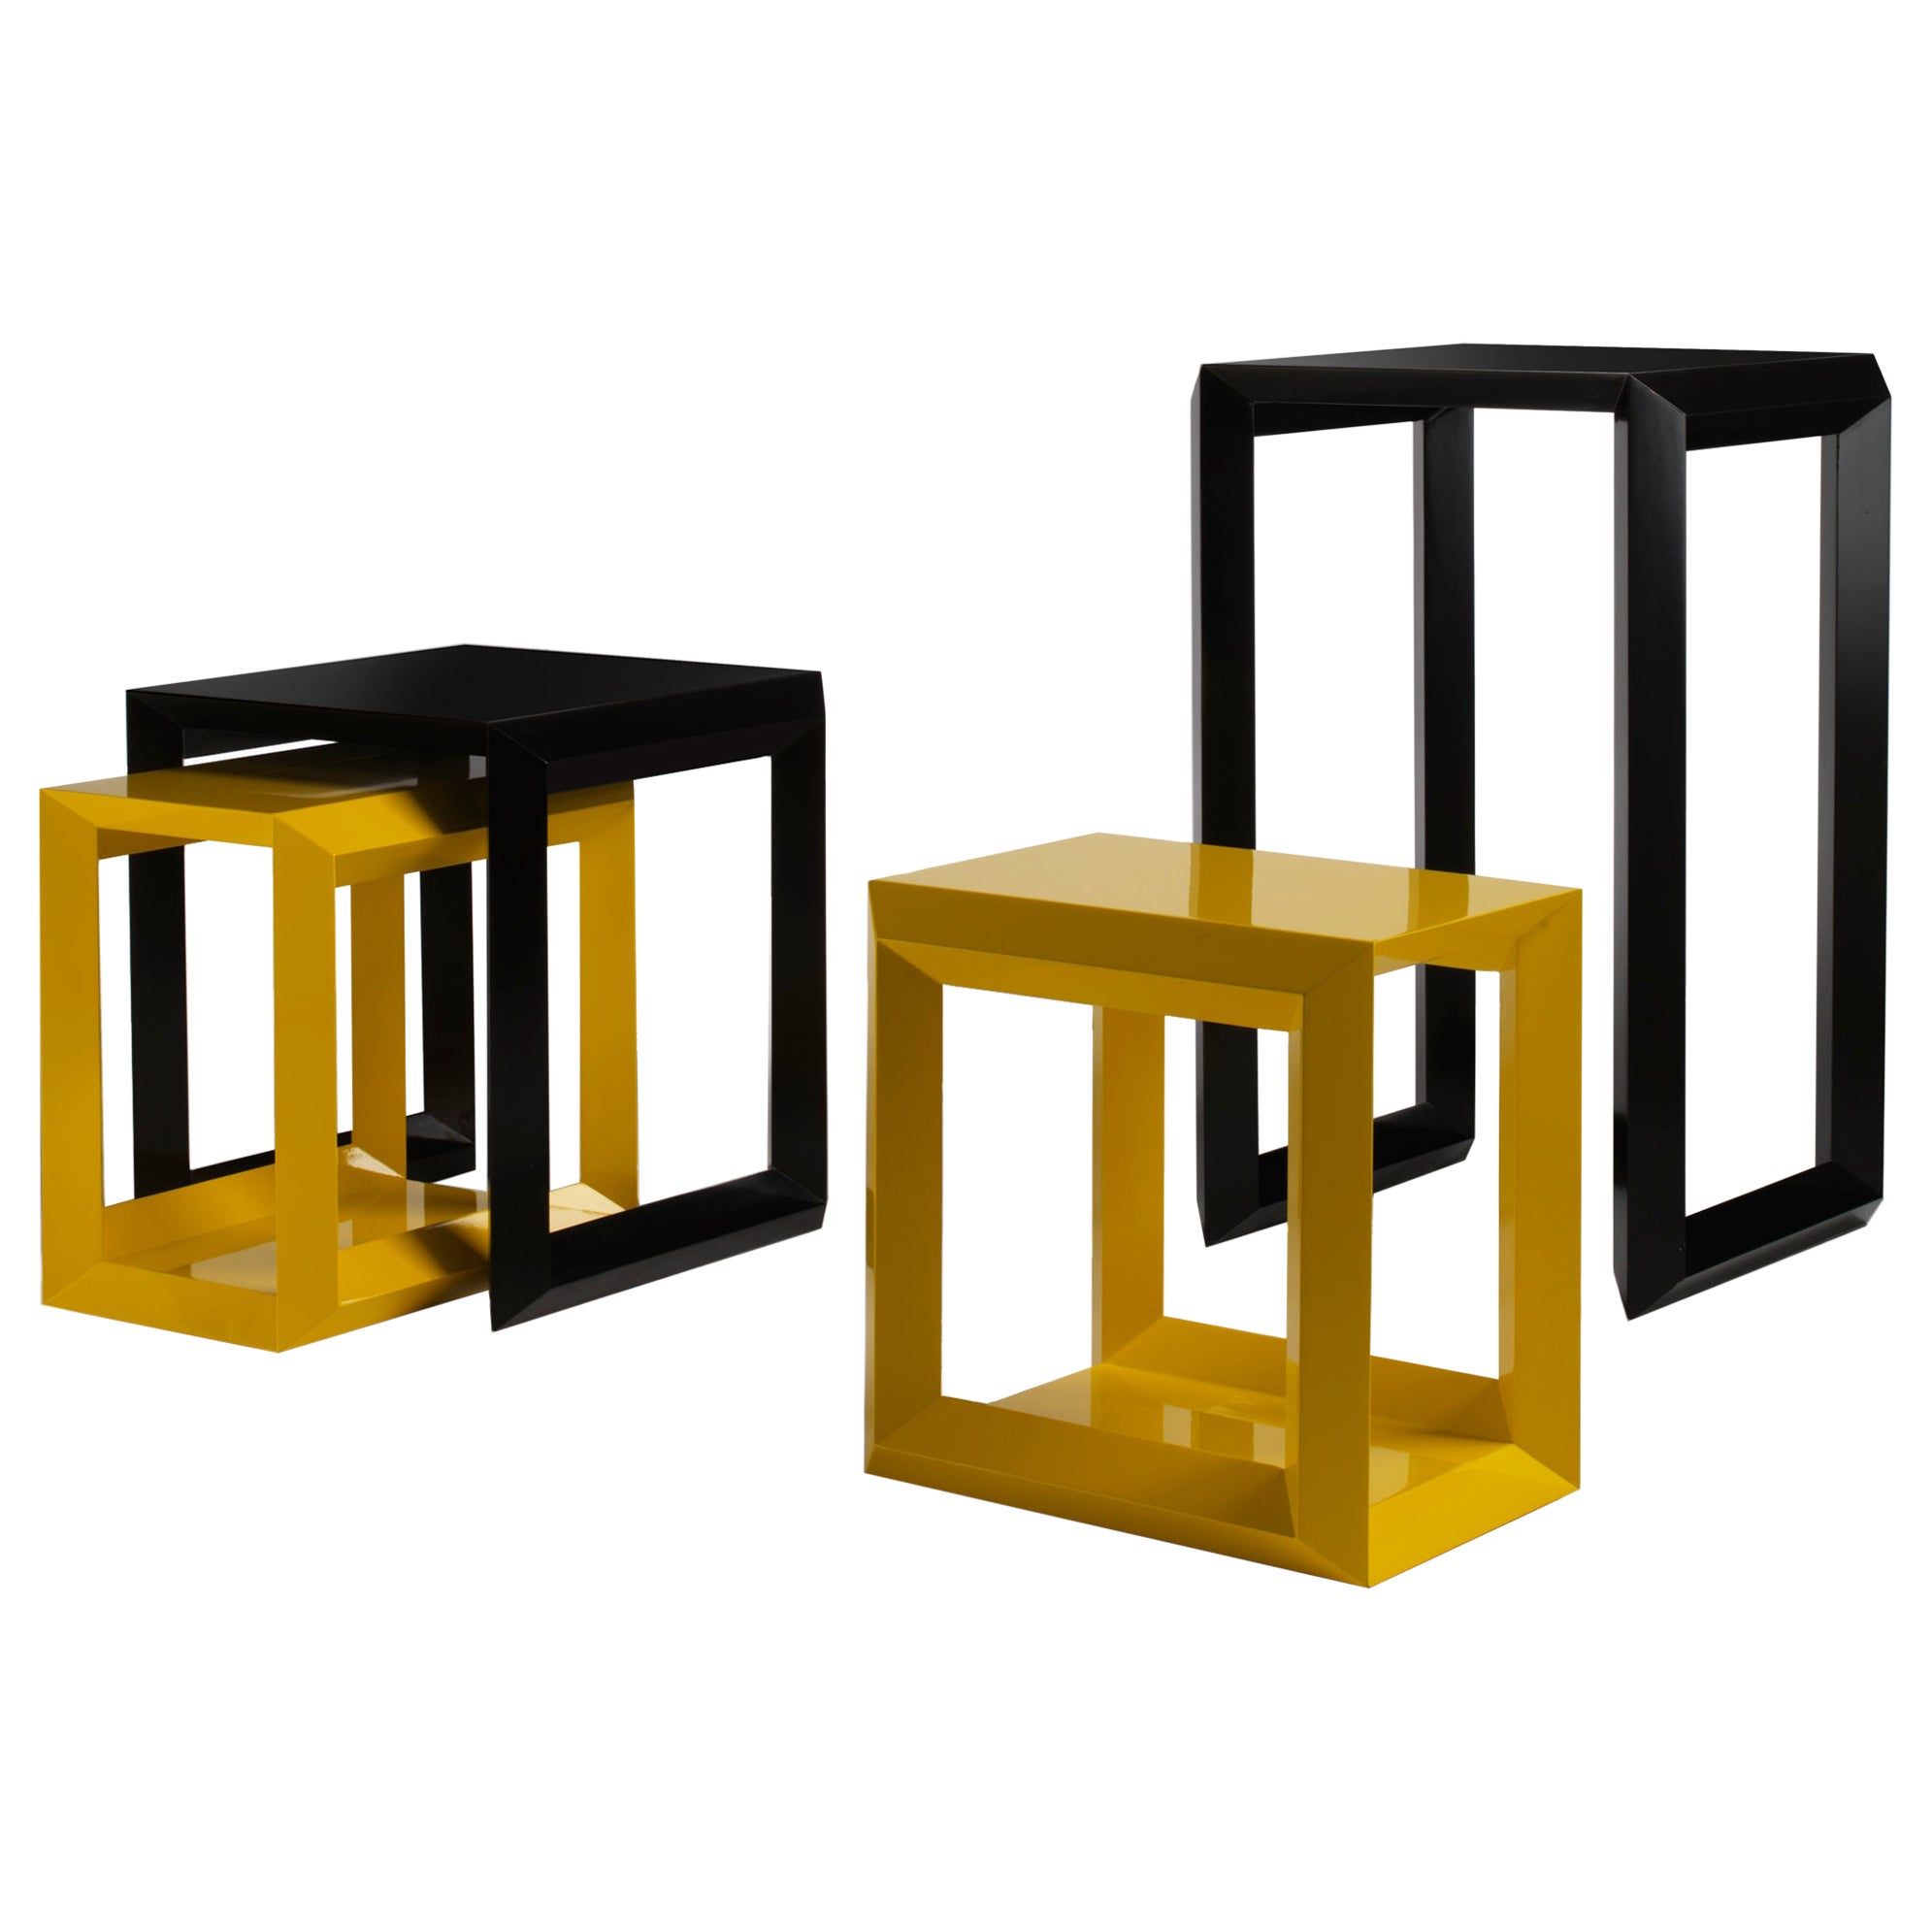 BLADE Nest of Tables in Solid Wood Black Yellow Lacquered design by Casamanara For Sale